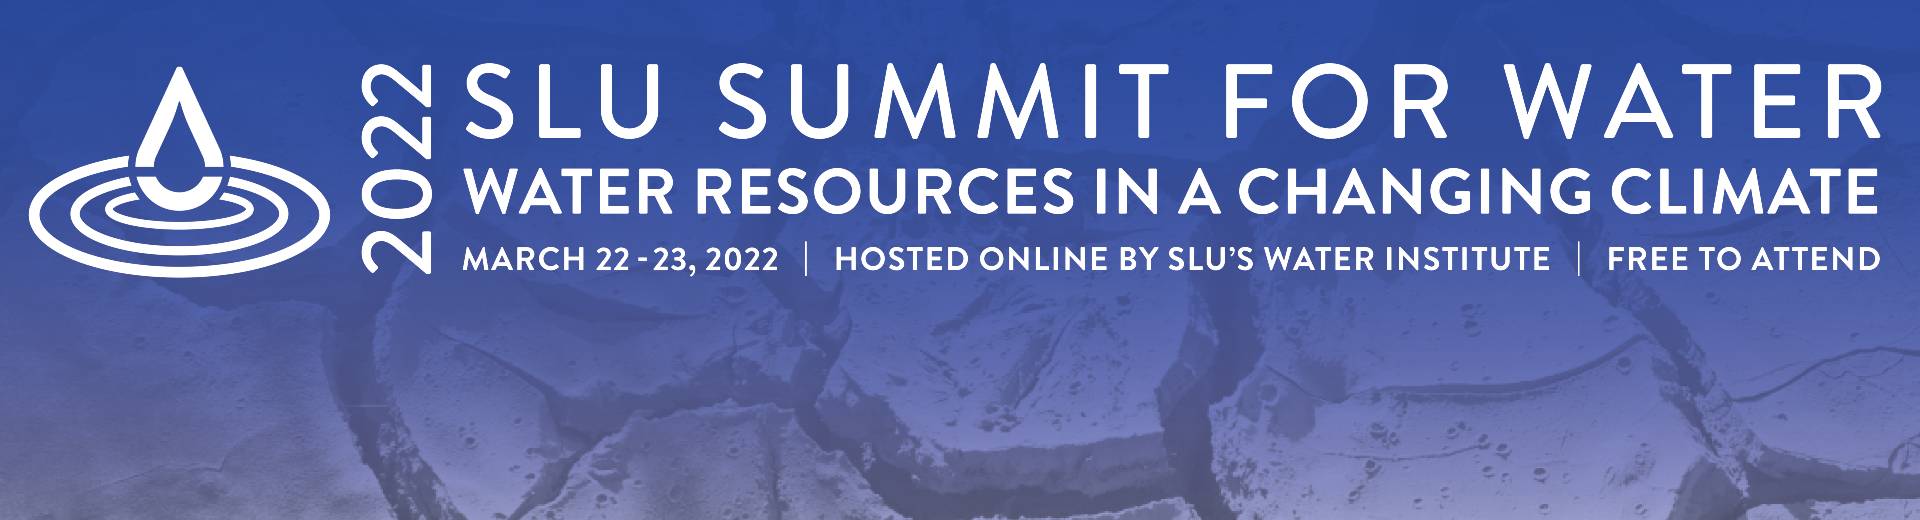 2022 SLU Summit for Water, Water Resources in a Changing Climate, March 22-23, 2022, Hosted Online by SLU's Water Institute, Free to Attend